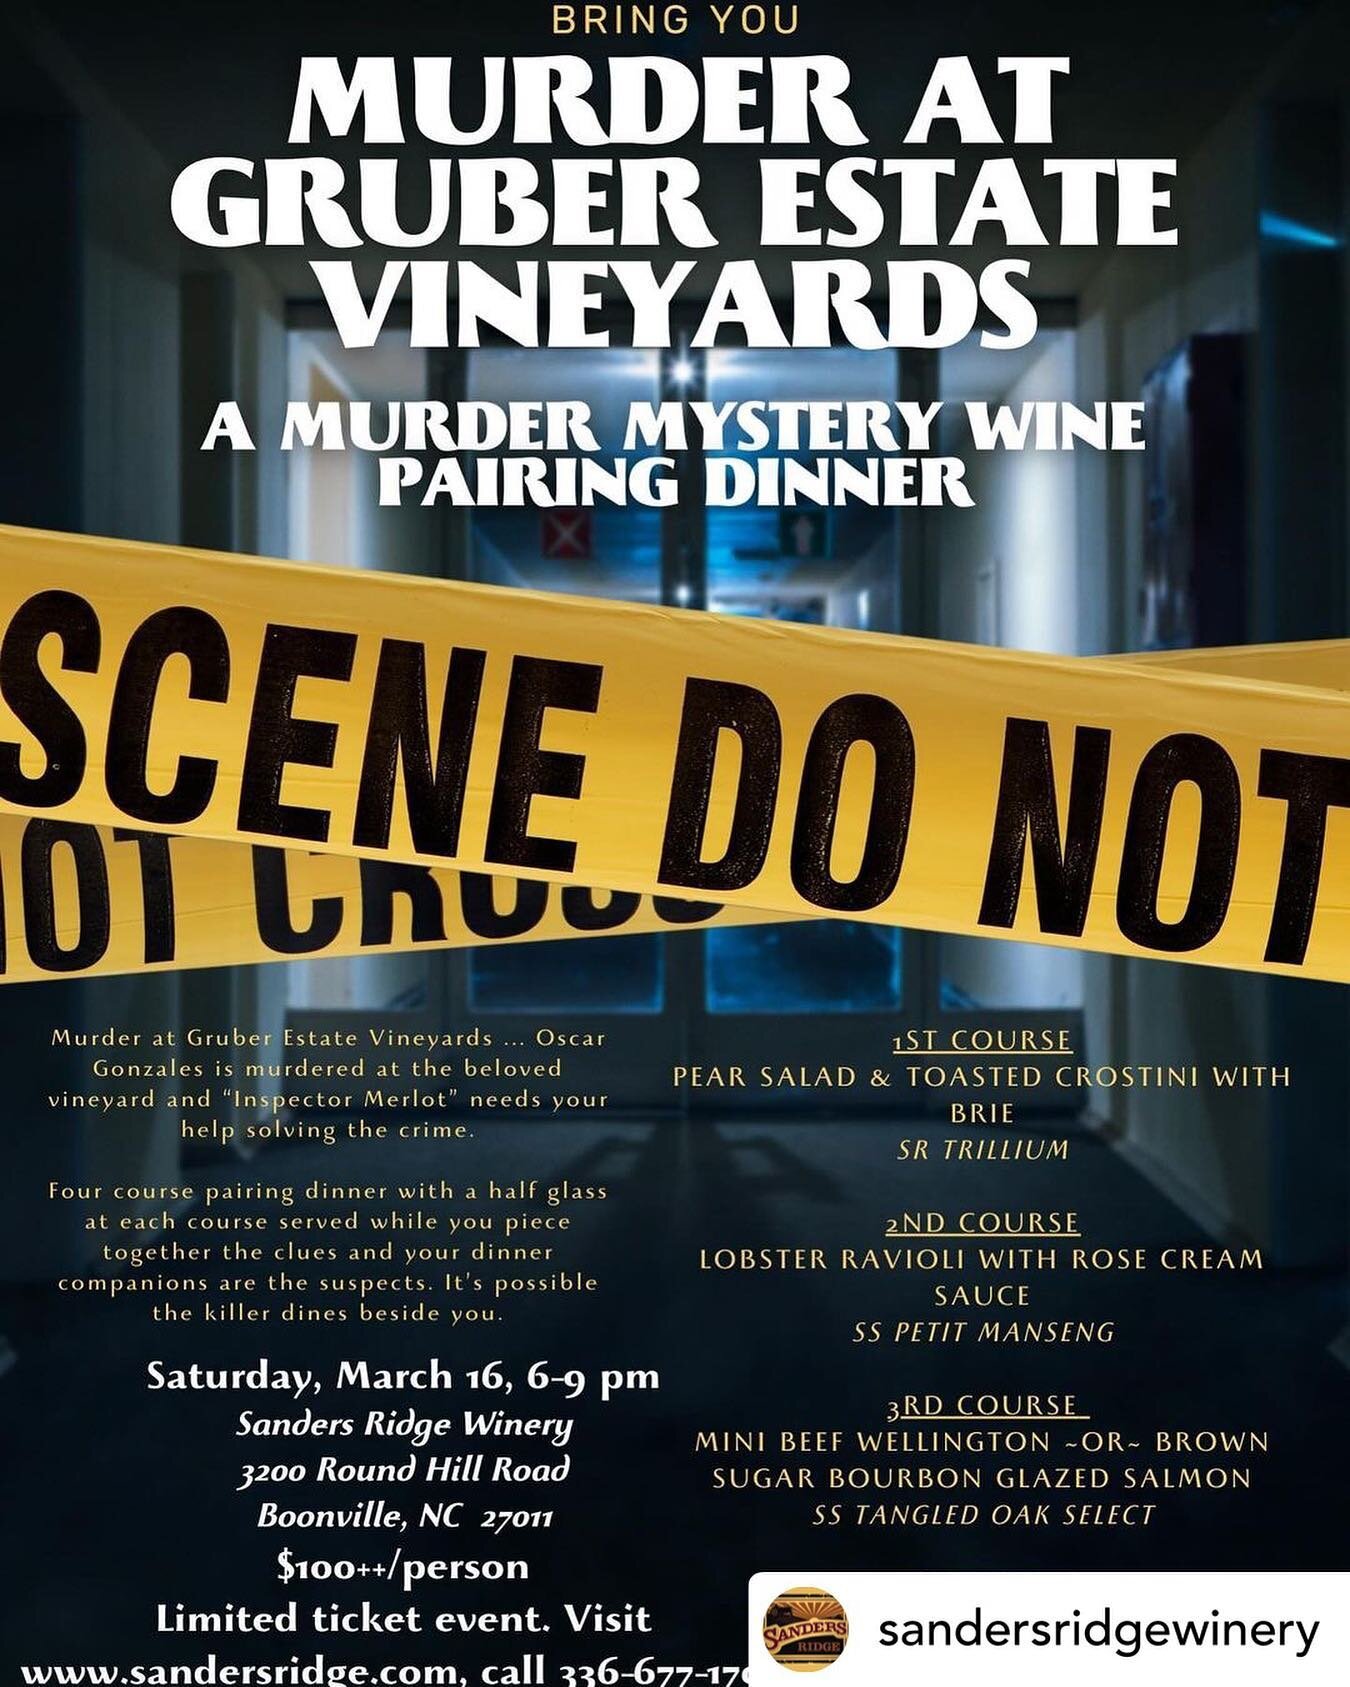 Posted @withregram &bull; @sandersridgewinery Murder Mystery Wine Pairing Dinner~March 16, 6-9 pm.  A 4-course dinner with a half glass of wine at each course $100++ per person PLUS the inclusive murder mystery! 

🔪You guys are in for an amazing nig